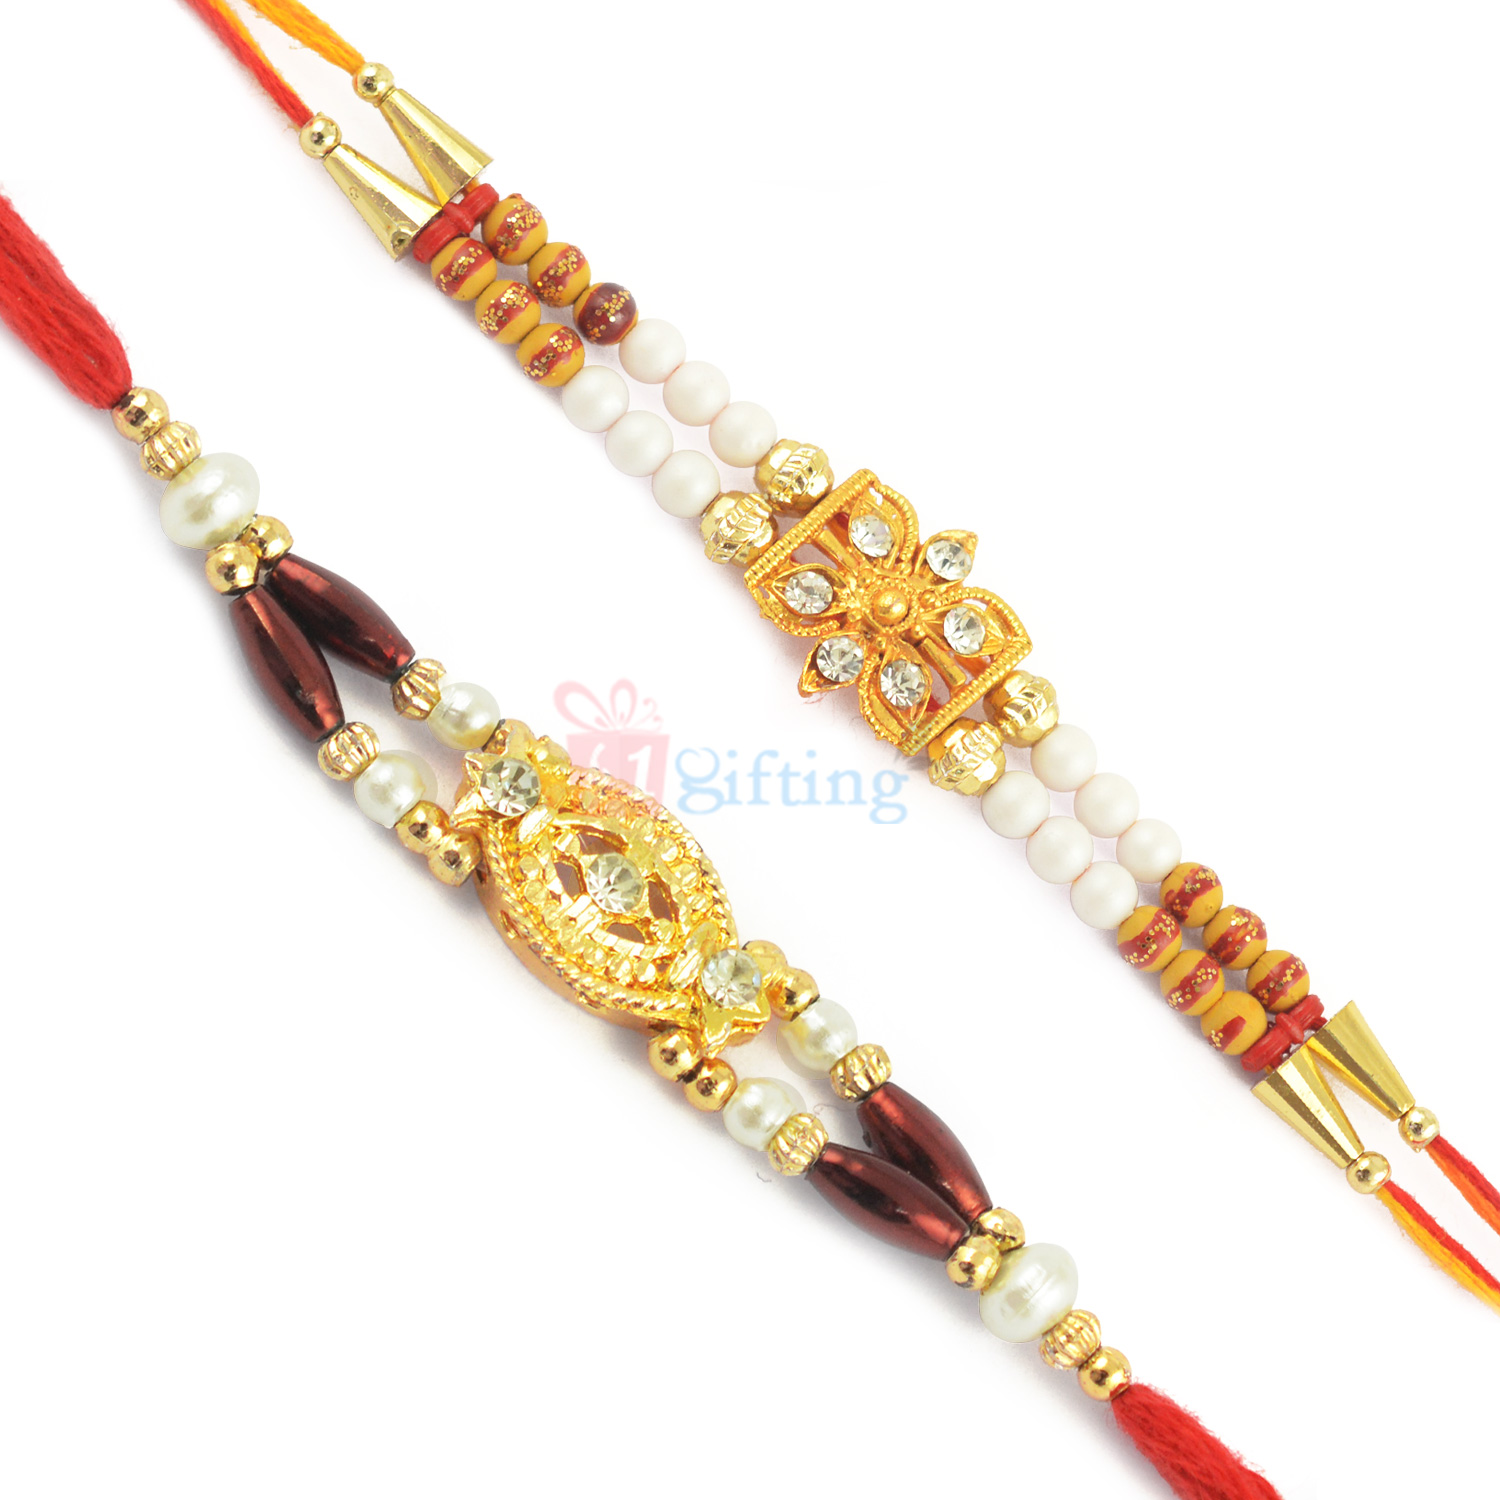 Rakhi Set of 2 from Sisterly Love Expressions